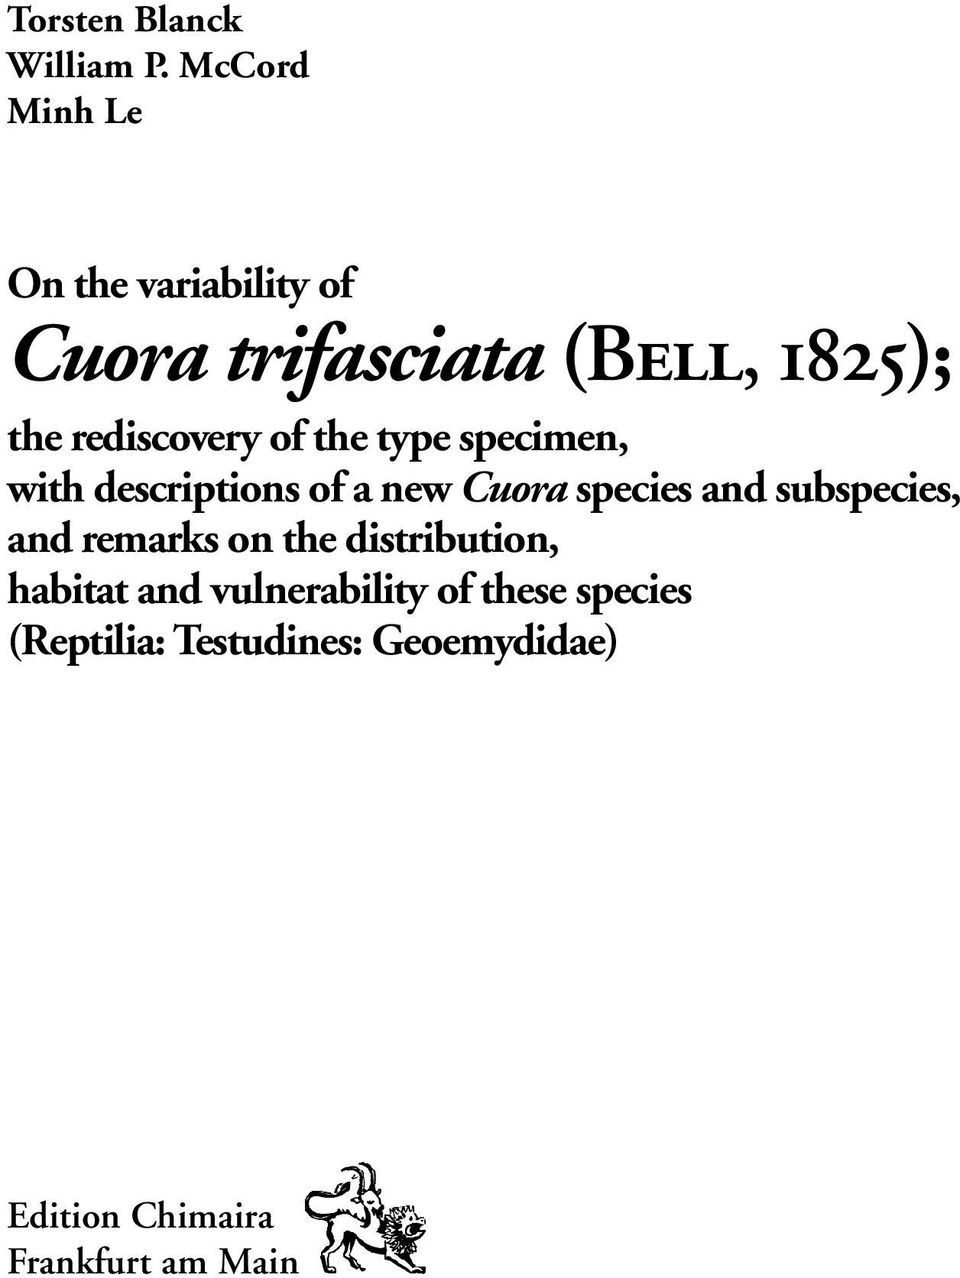 rediscovery of the type specimen, with descriptions of a new Cuora species and